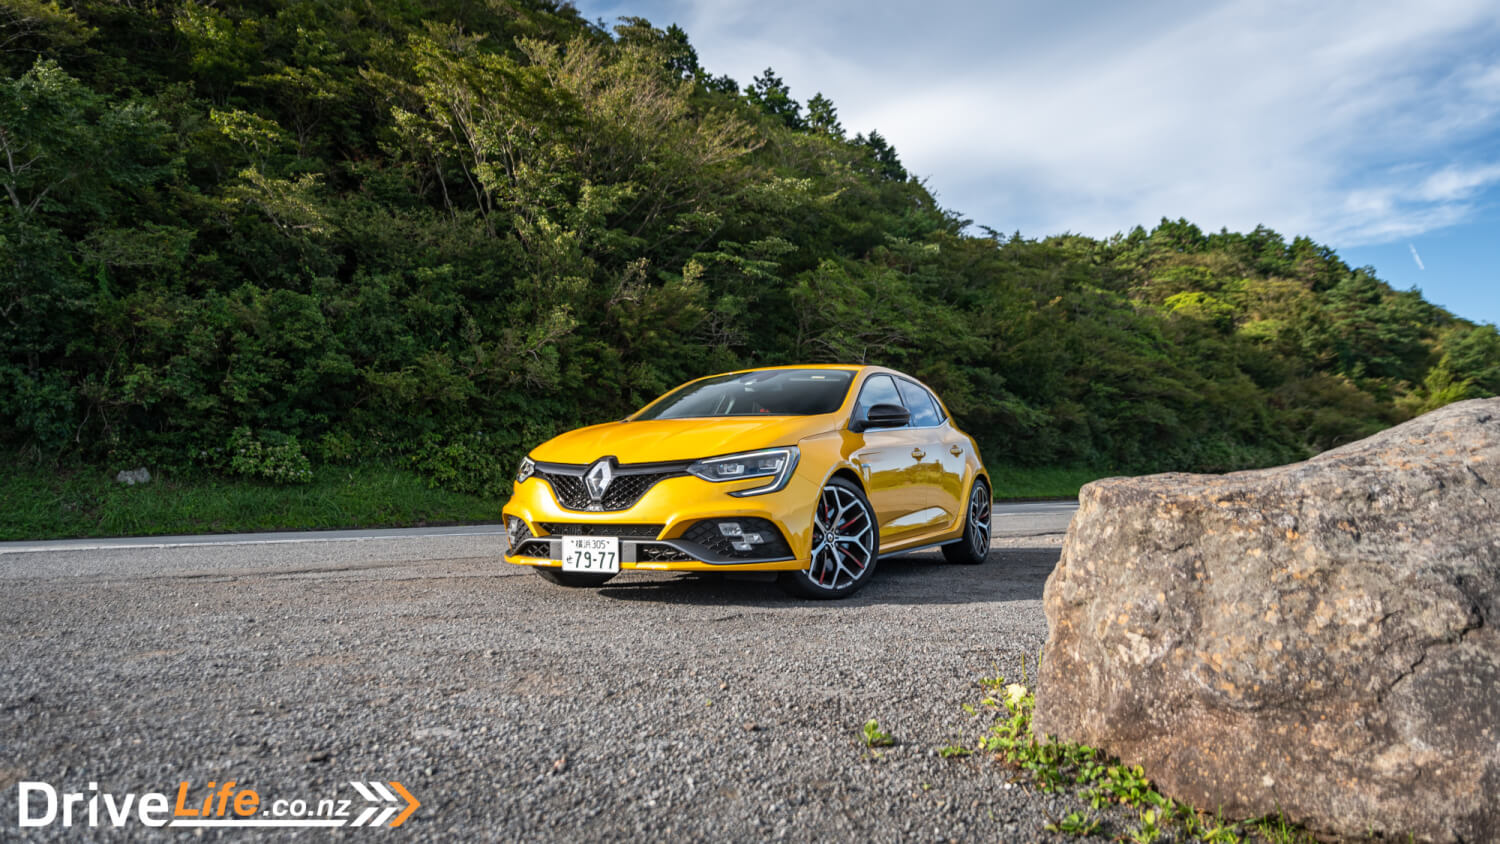 Renault Megane RS Is a Grown-Up Hot Hatch